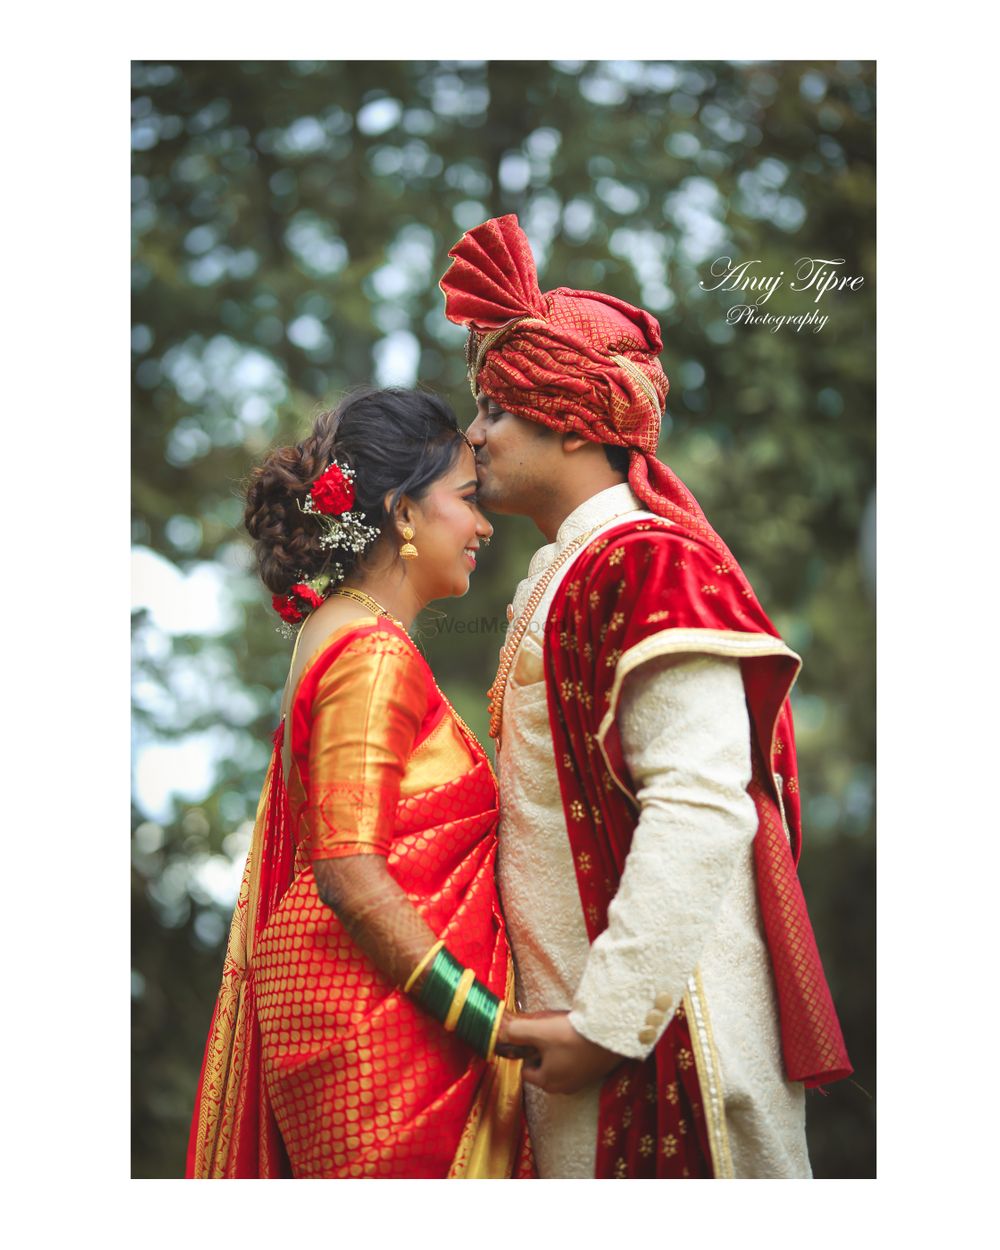 Photo From kedar + Apurva ❣️ - By Anuj Tipre Photography